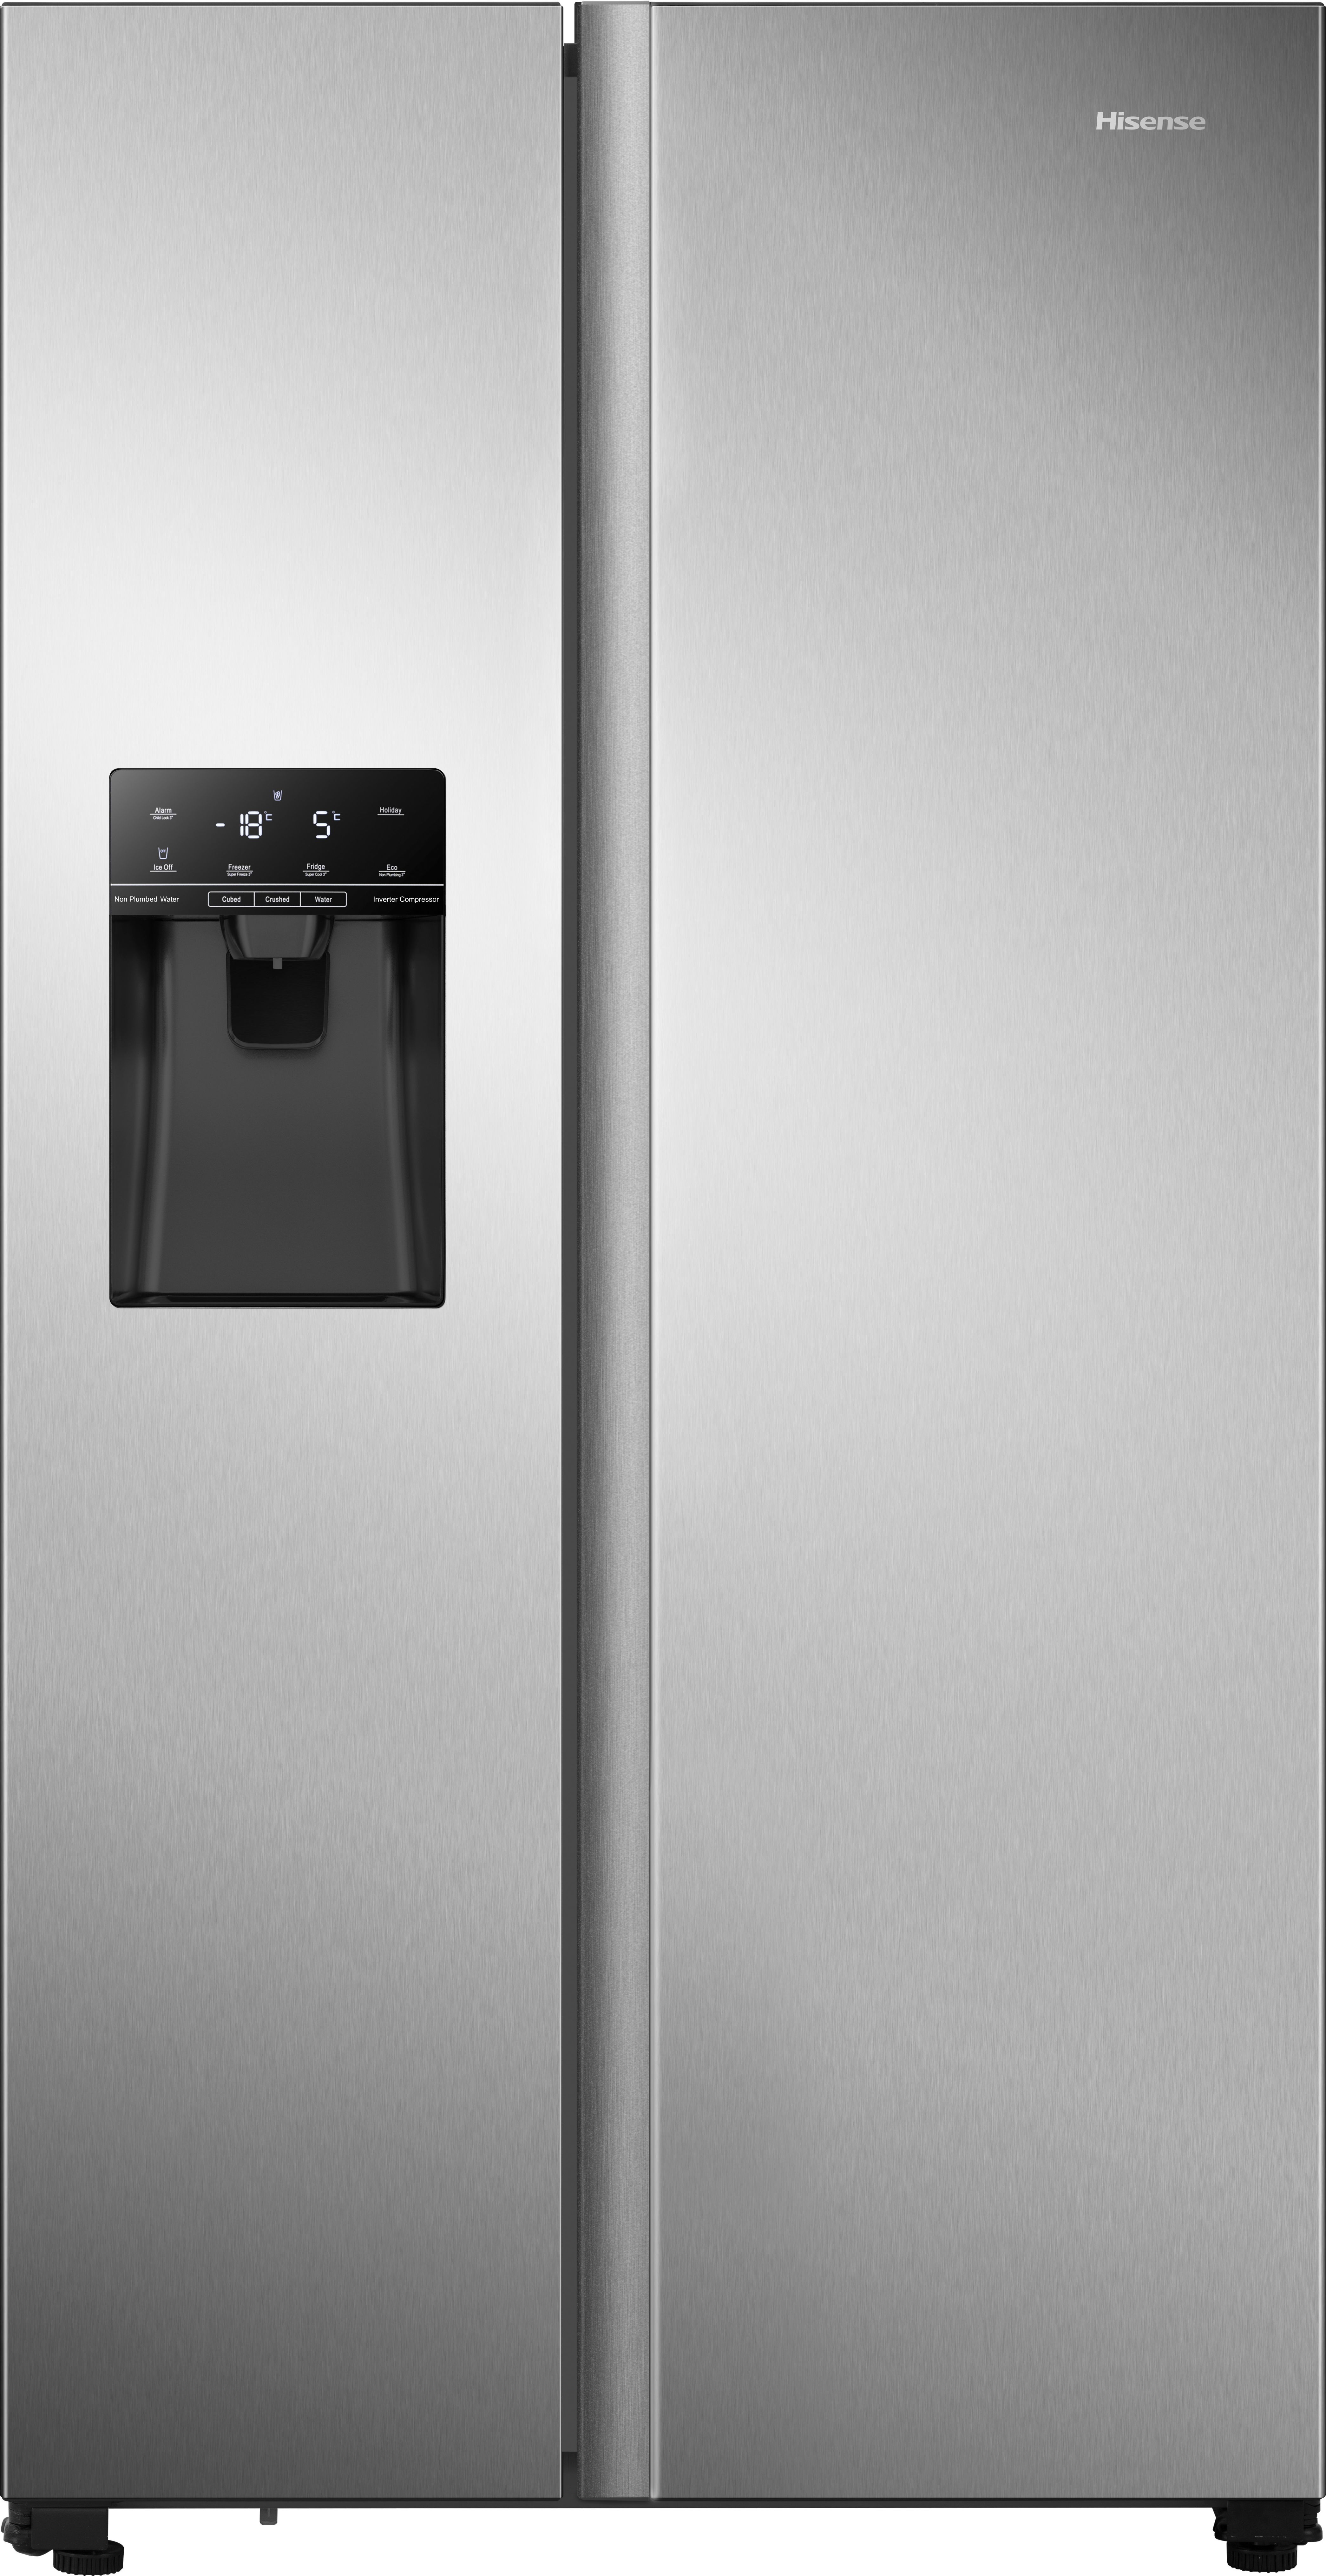 Hisense RS694N4TZE Non-Plumbed Frost Free American Fridge Freezer - Stainless Steel - E Rated, Stainless Steel